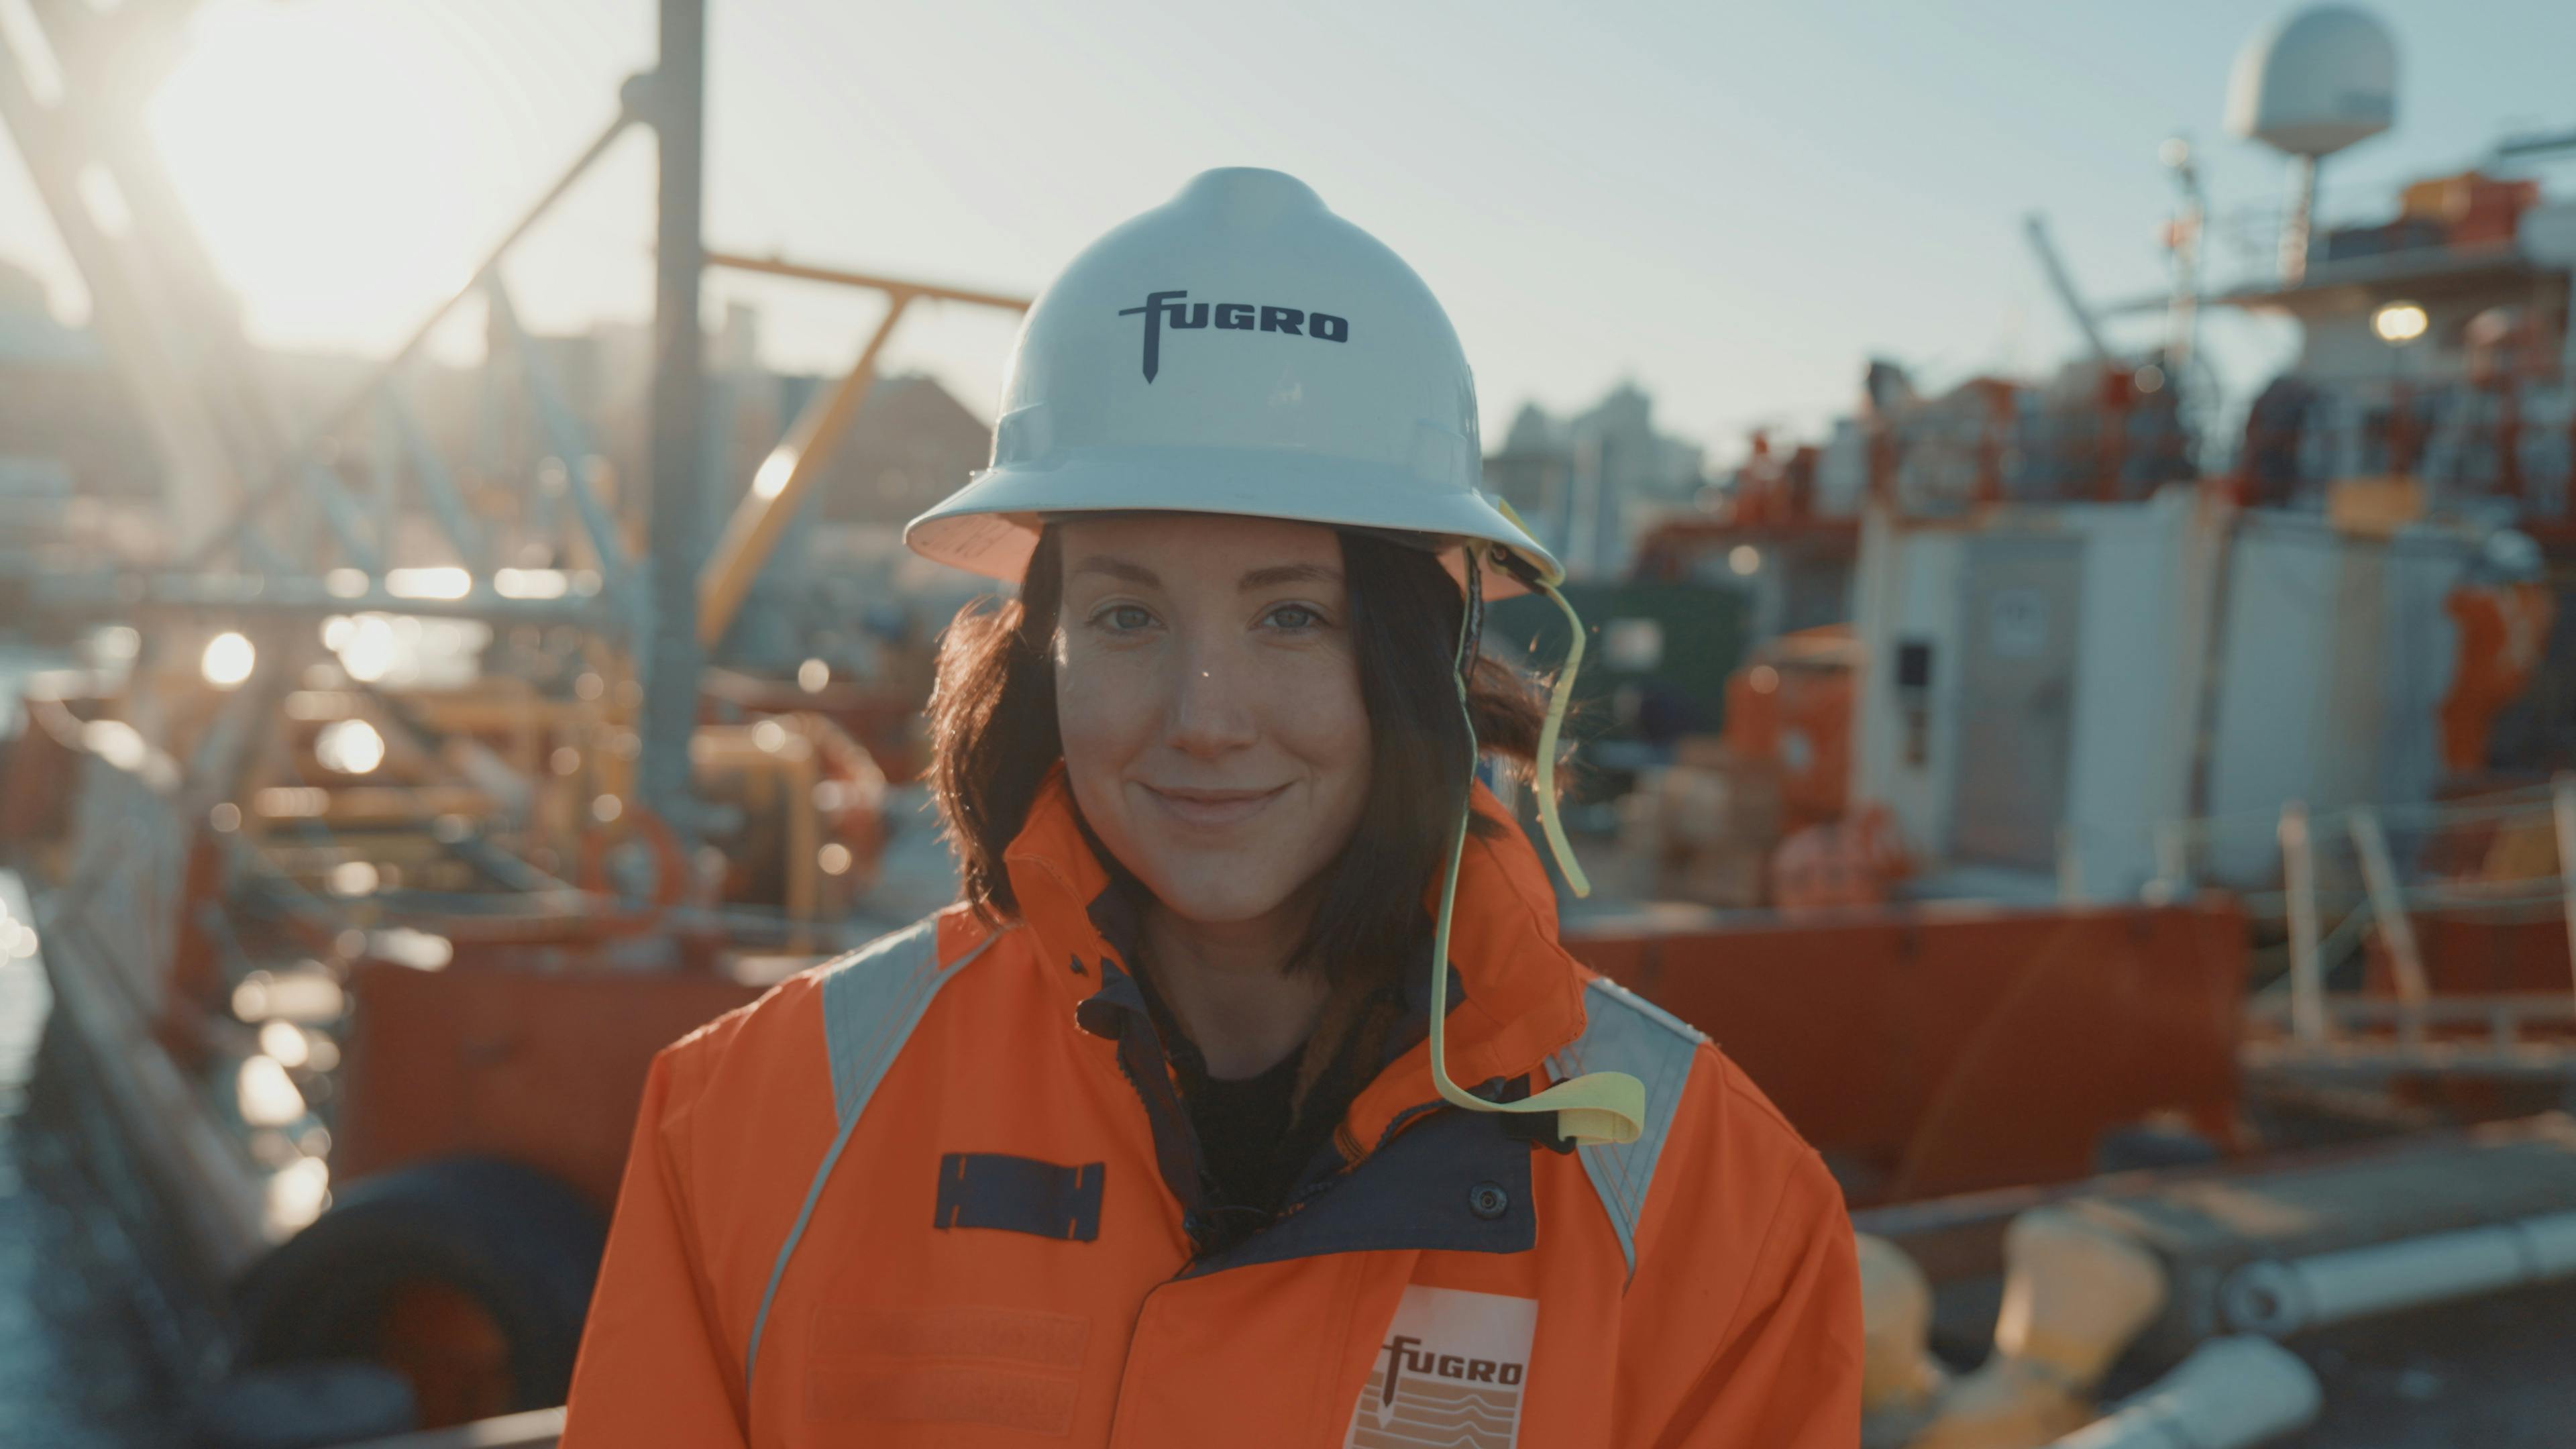 Project 'Faces of Fugro', for recruitment purposes.
If you wish to use any of these hero photo's, please contact:
Robert Spence - r.spence@fugro.com
or Lisette Blankestijn - l.blankestijn@fugro.com